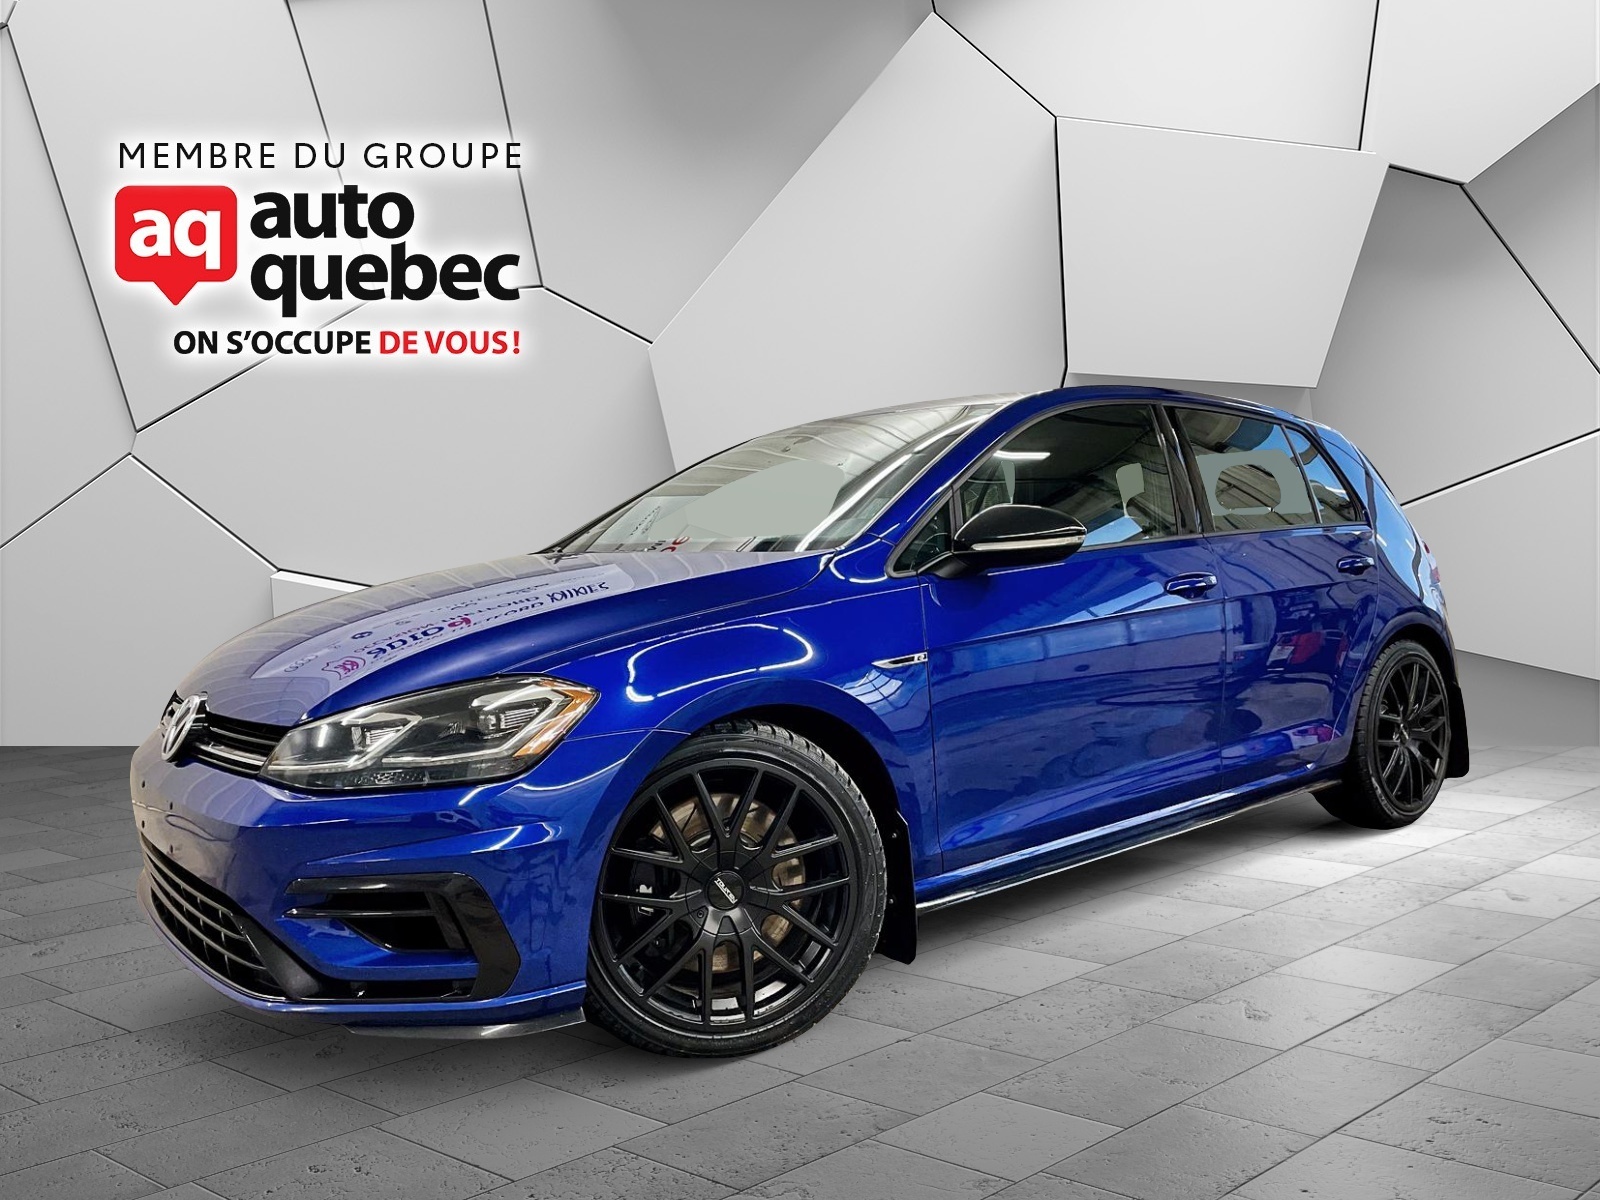 2018 Volkswagen Golf R Stage 1/370hp 377 FT-LBS/IE Intake and carbon fibe